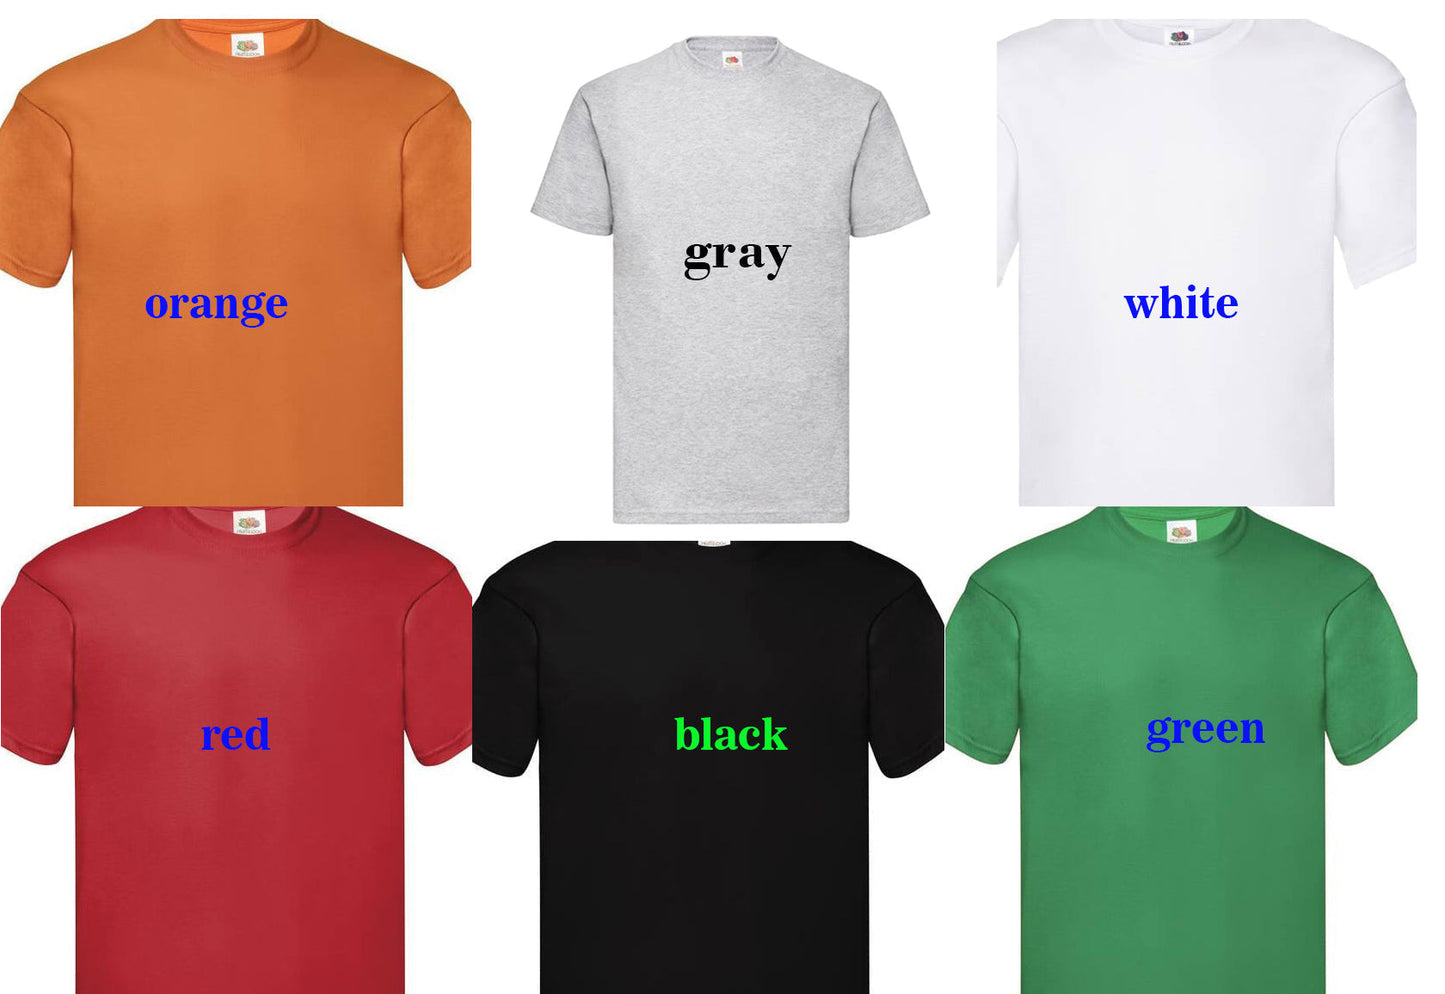 093. CRAZY FACE, Personalized T-Shirt, Custom Text, Make Your Own Shirt, Custom Tee